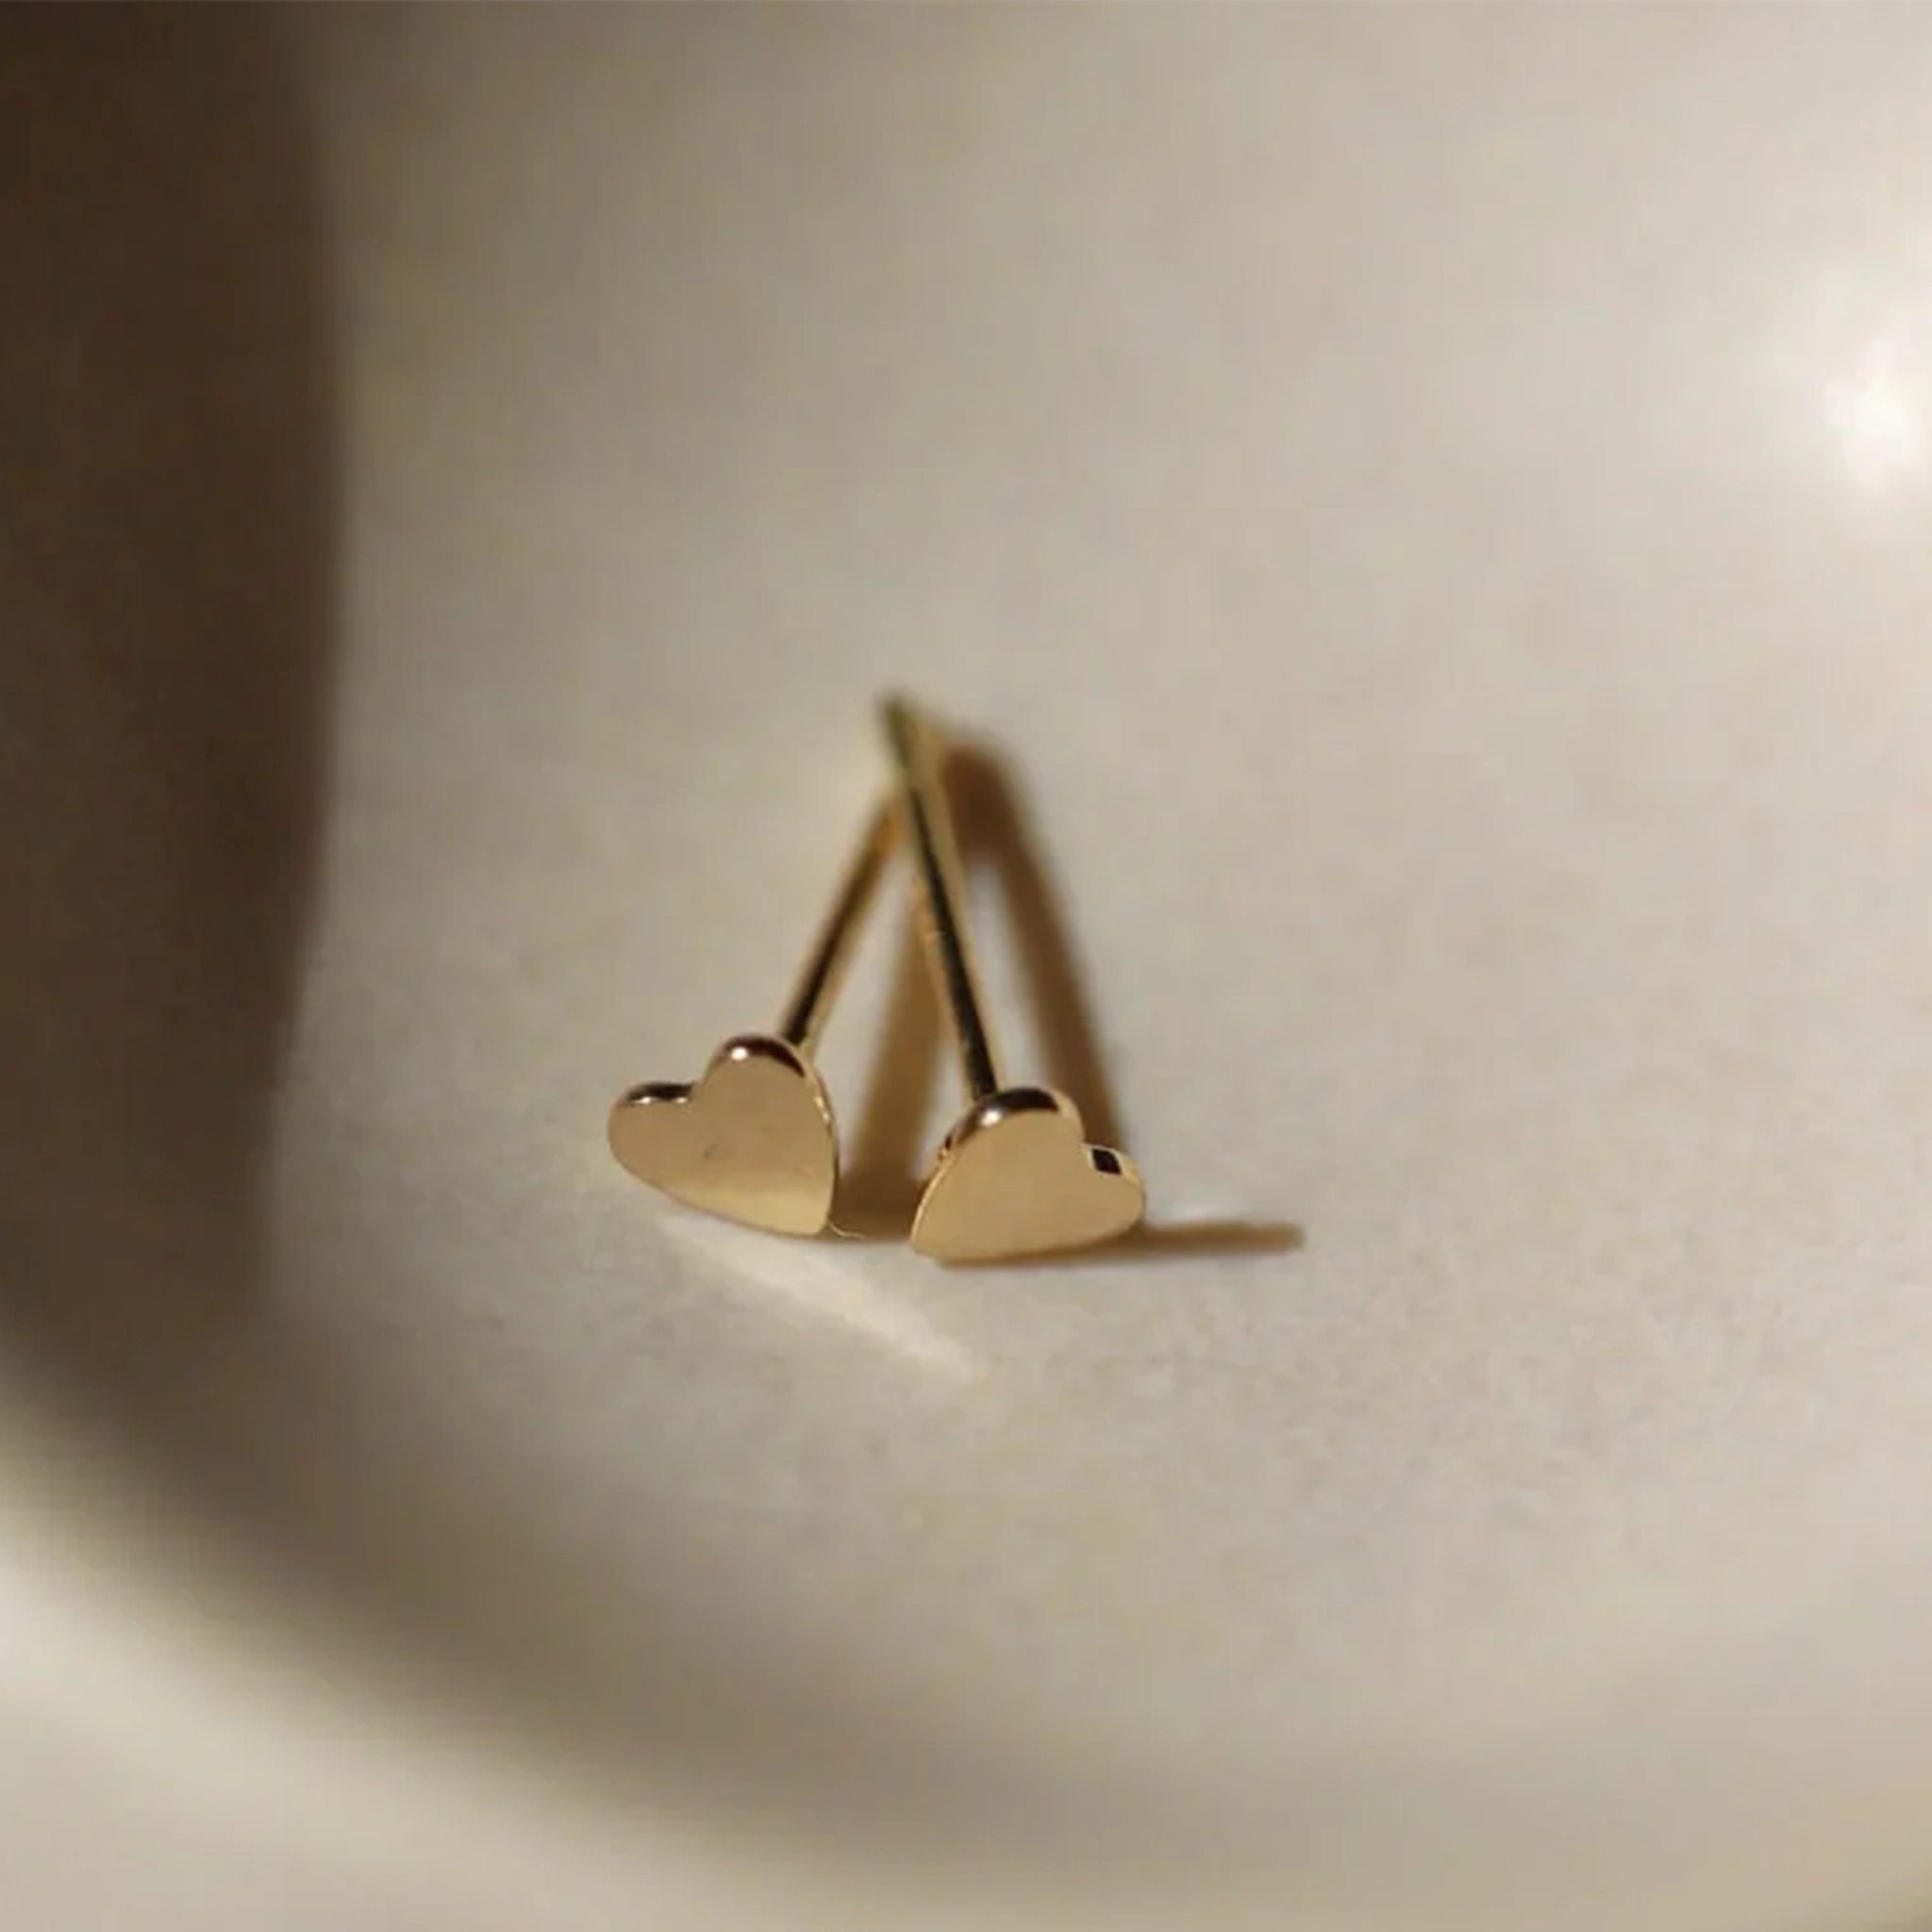 In a cream ceramic bowl is a pair of gold stud earrings in the shape of tiny hearts. 